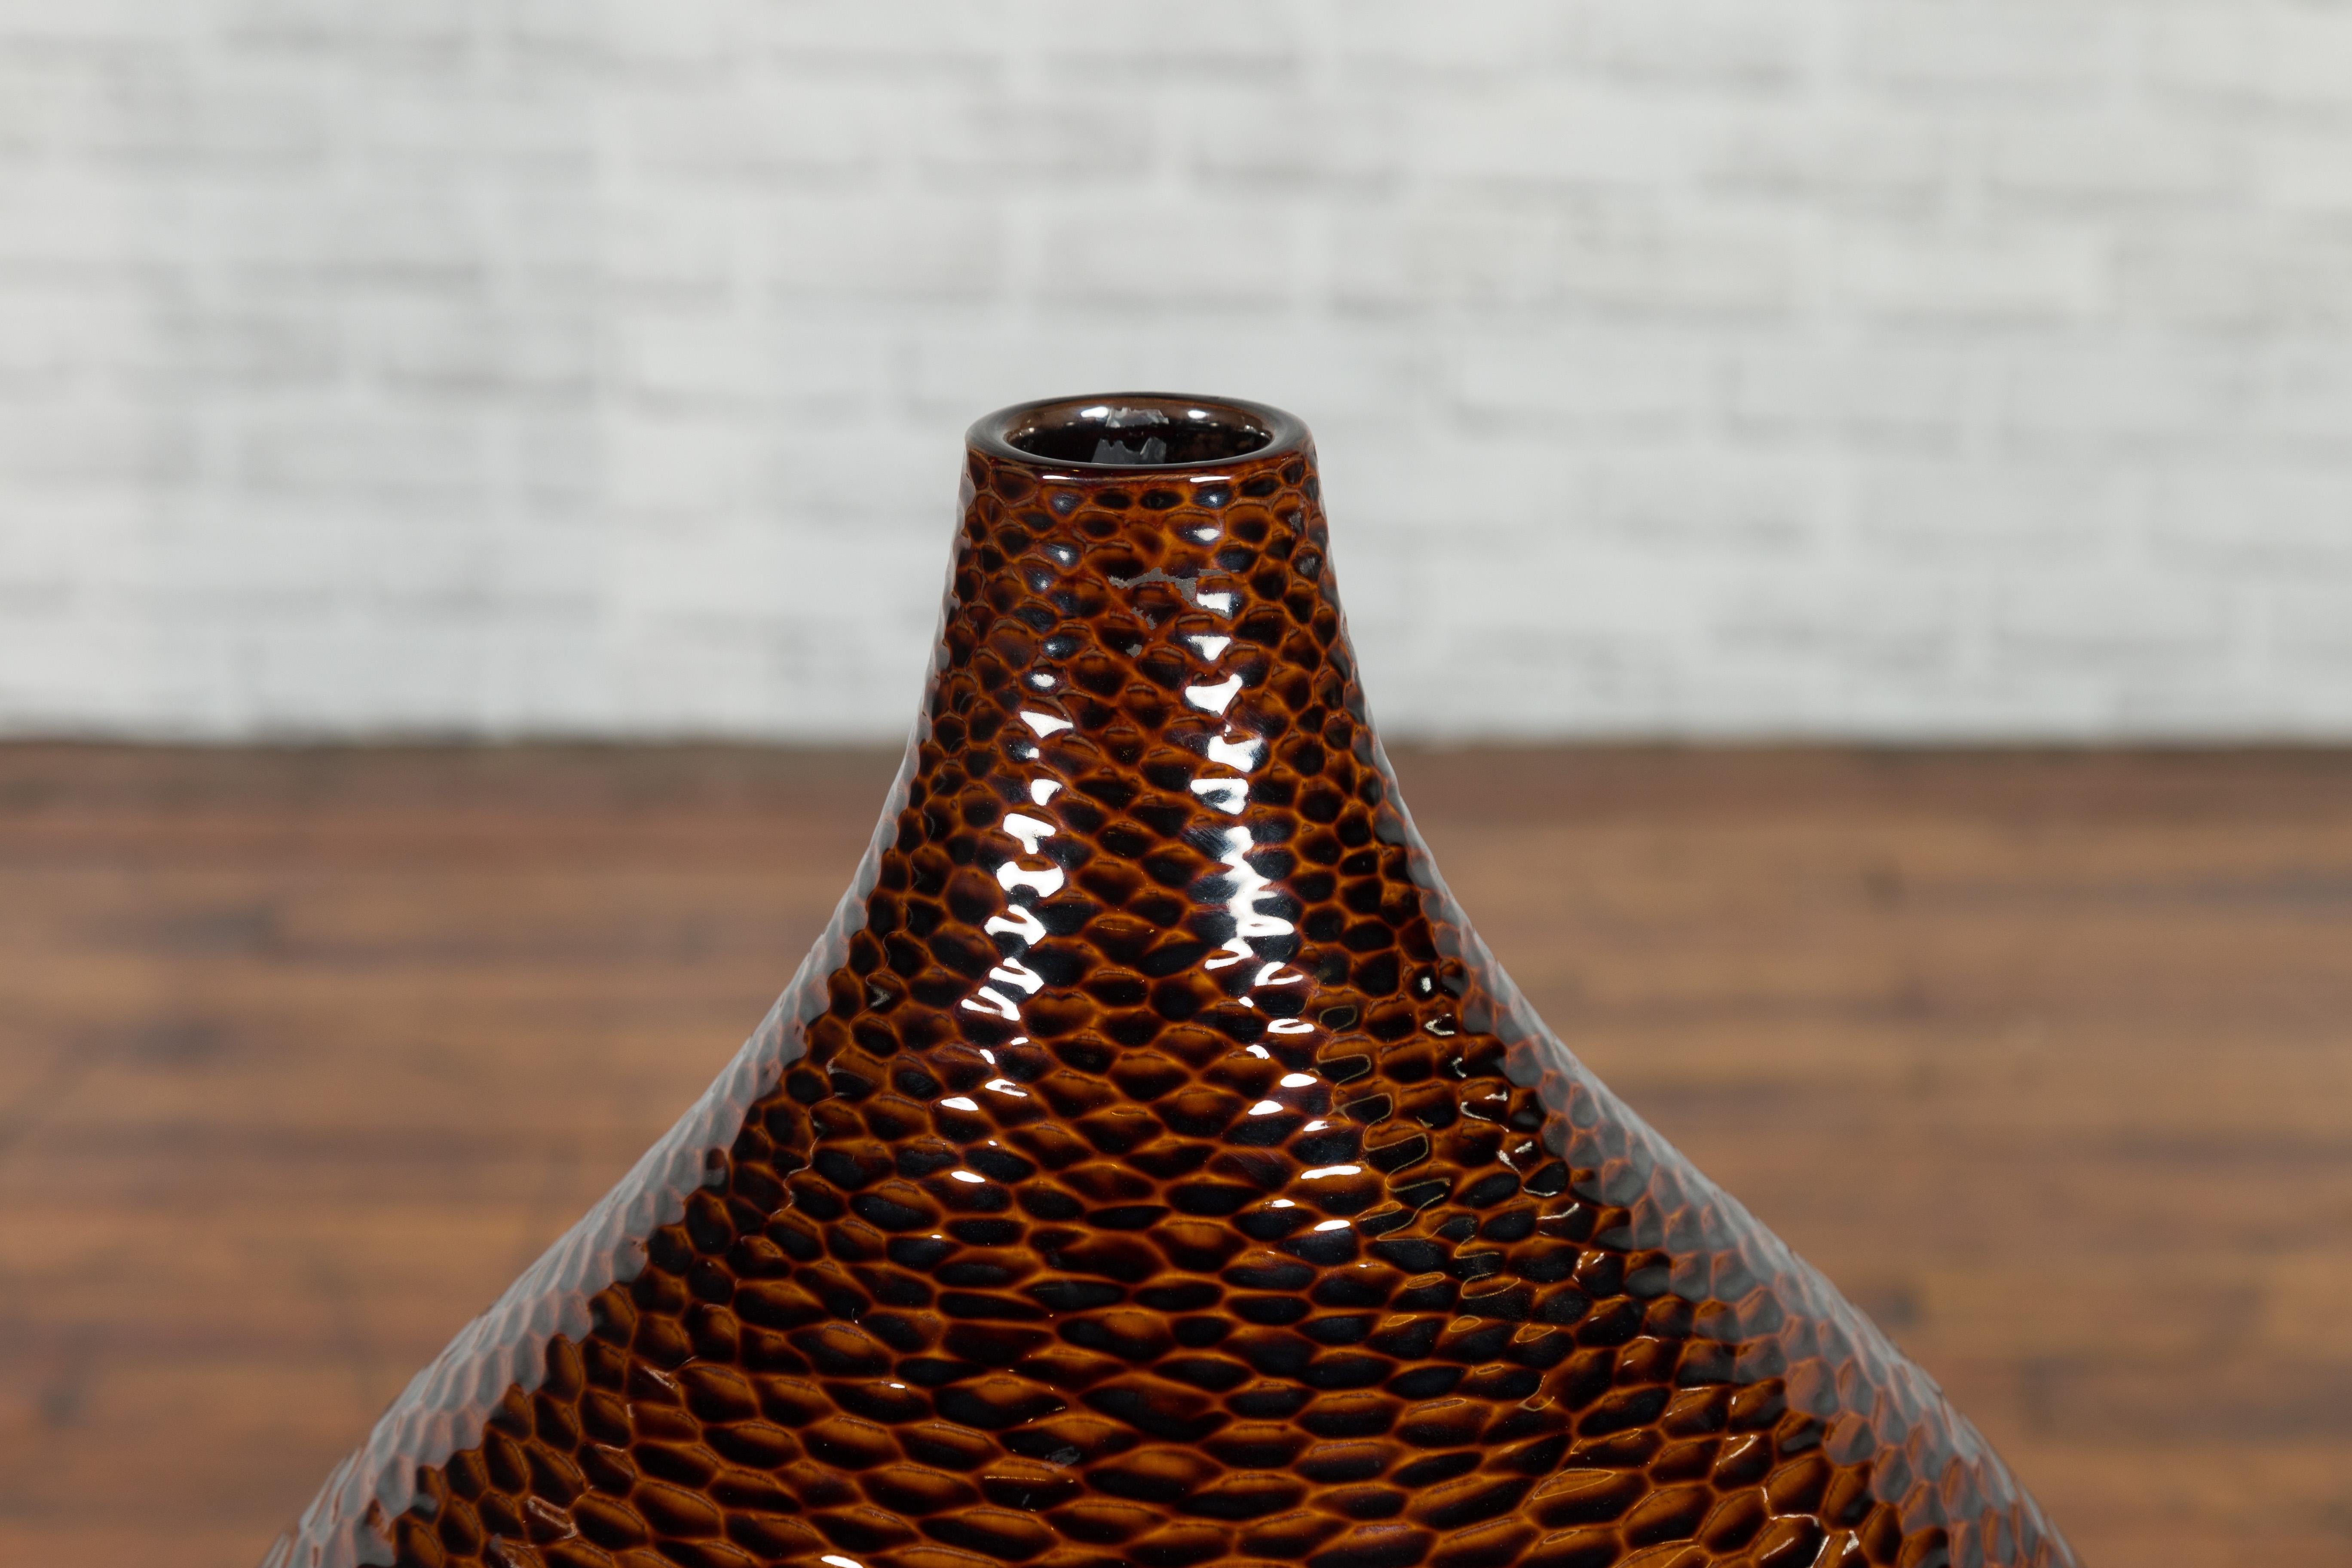 Thai Chiang Mai Brown Textured Teardrop Shaped Vase from the Prem Collection In Good Condition For Sale In Yonkers, NY